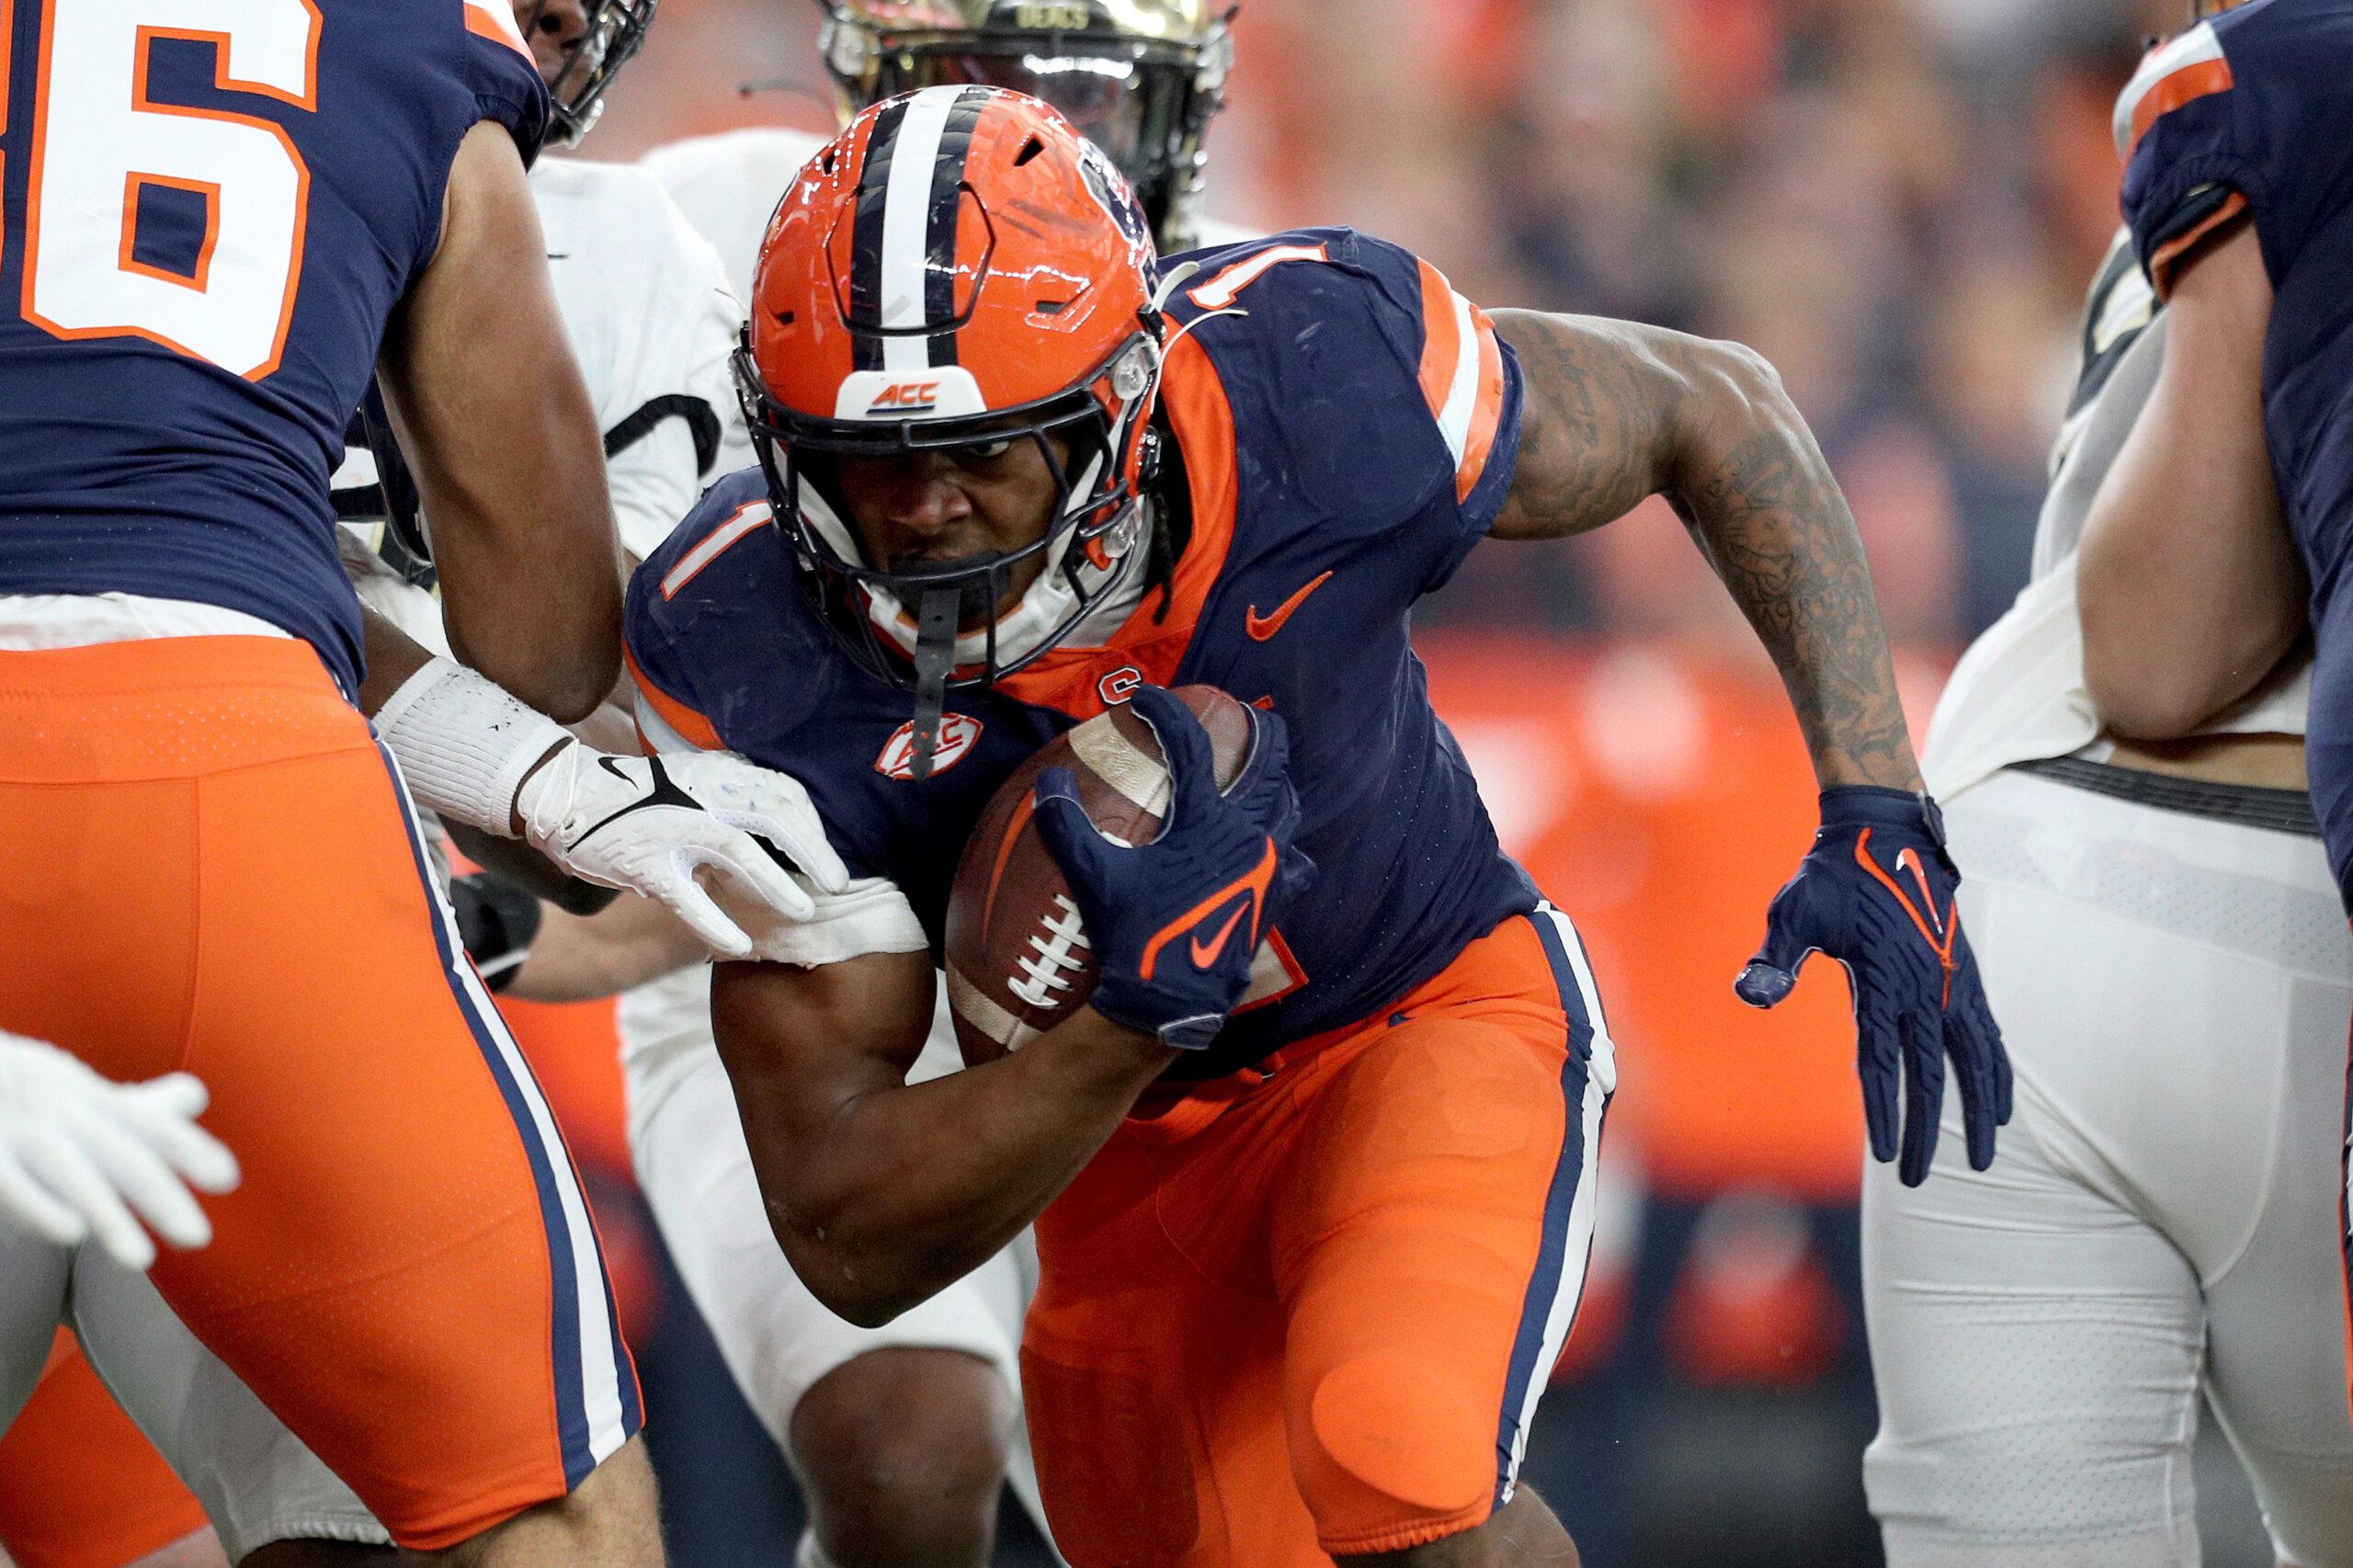 A Syracuse player carrying the football into a group of defenders.